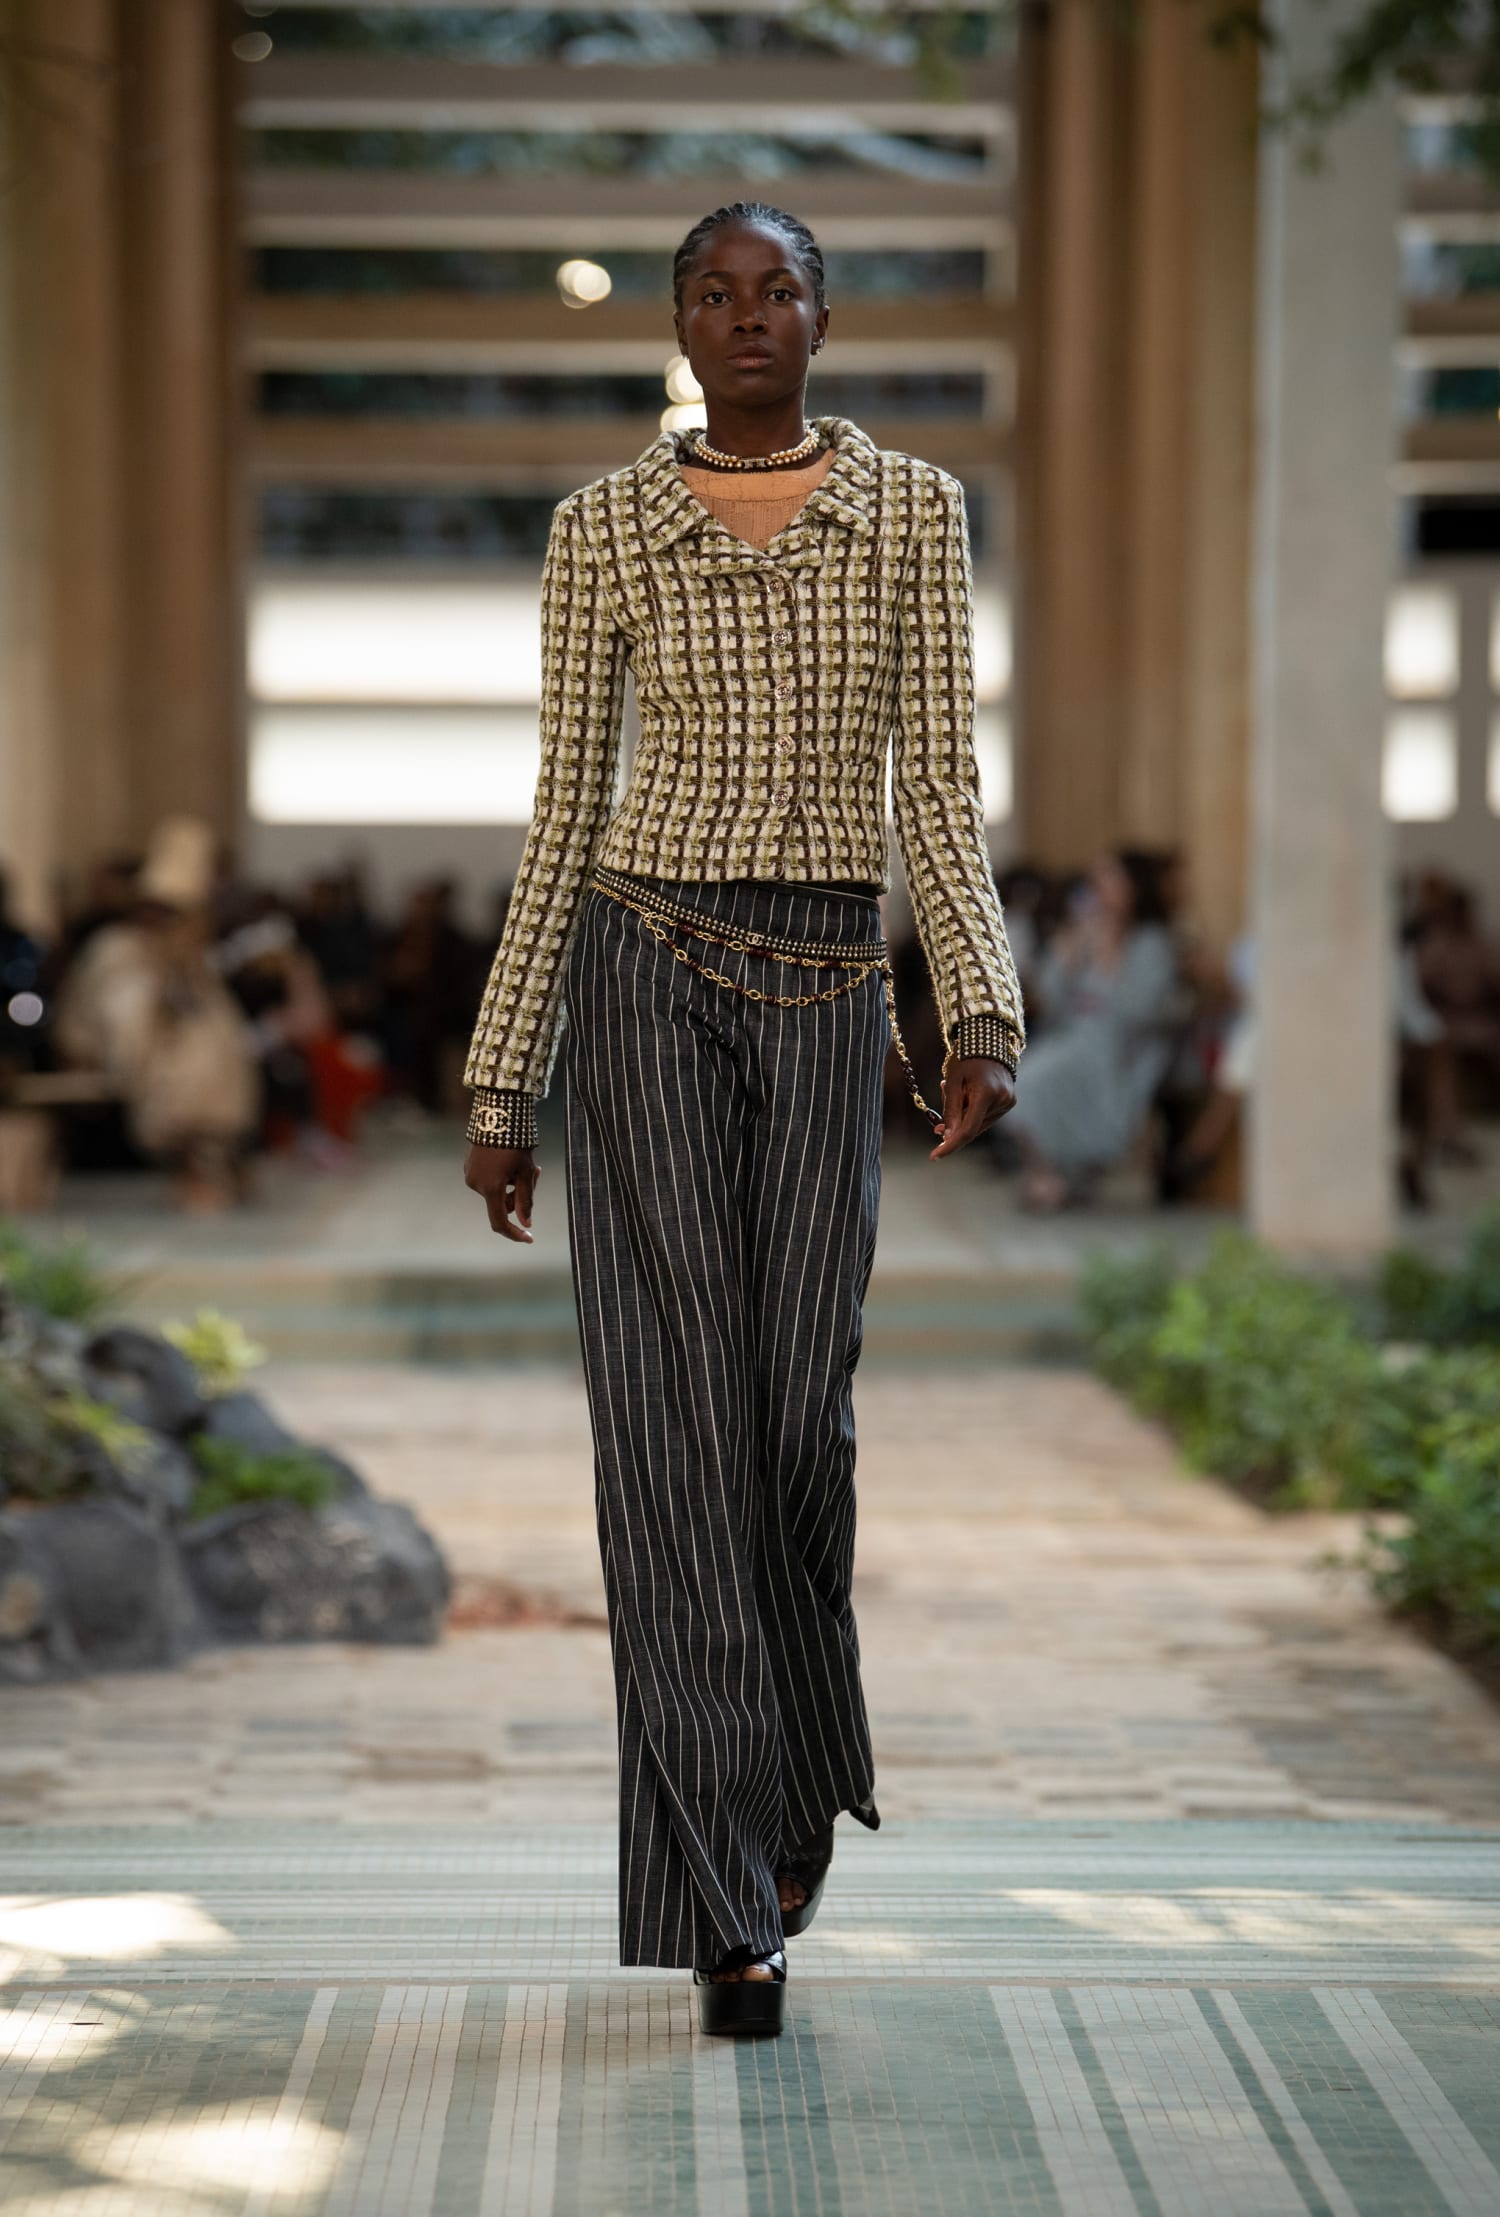 7 Chic Pre-Fall 2023 Trends to Kickstart Autumn With